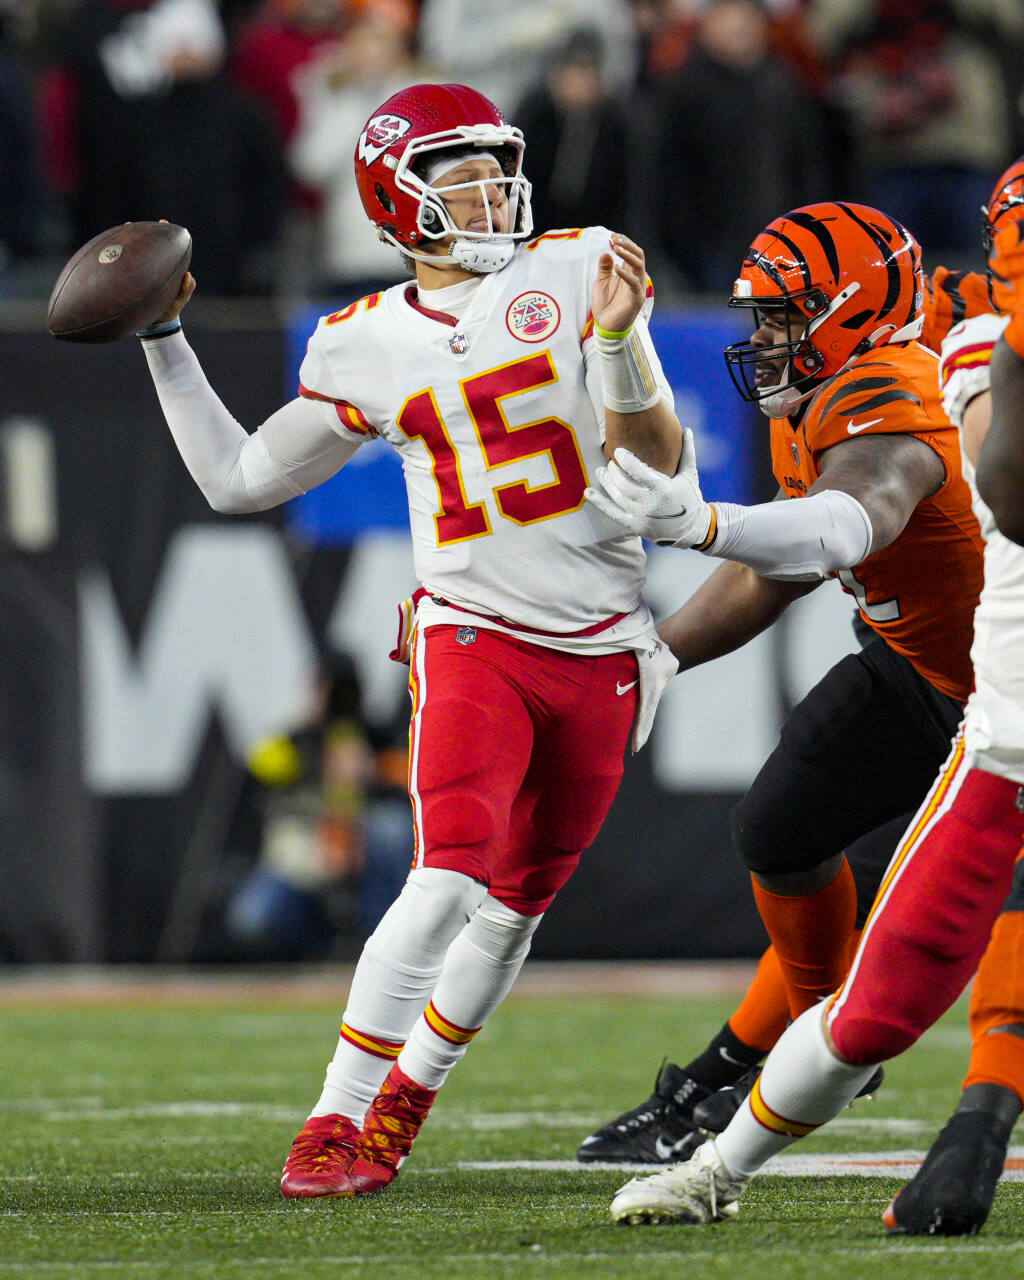 Patrick Mahomes is on an all-time great trajectory … but the Bengals have  the Chiefs' number